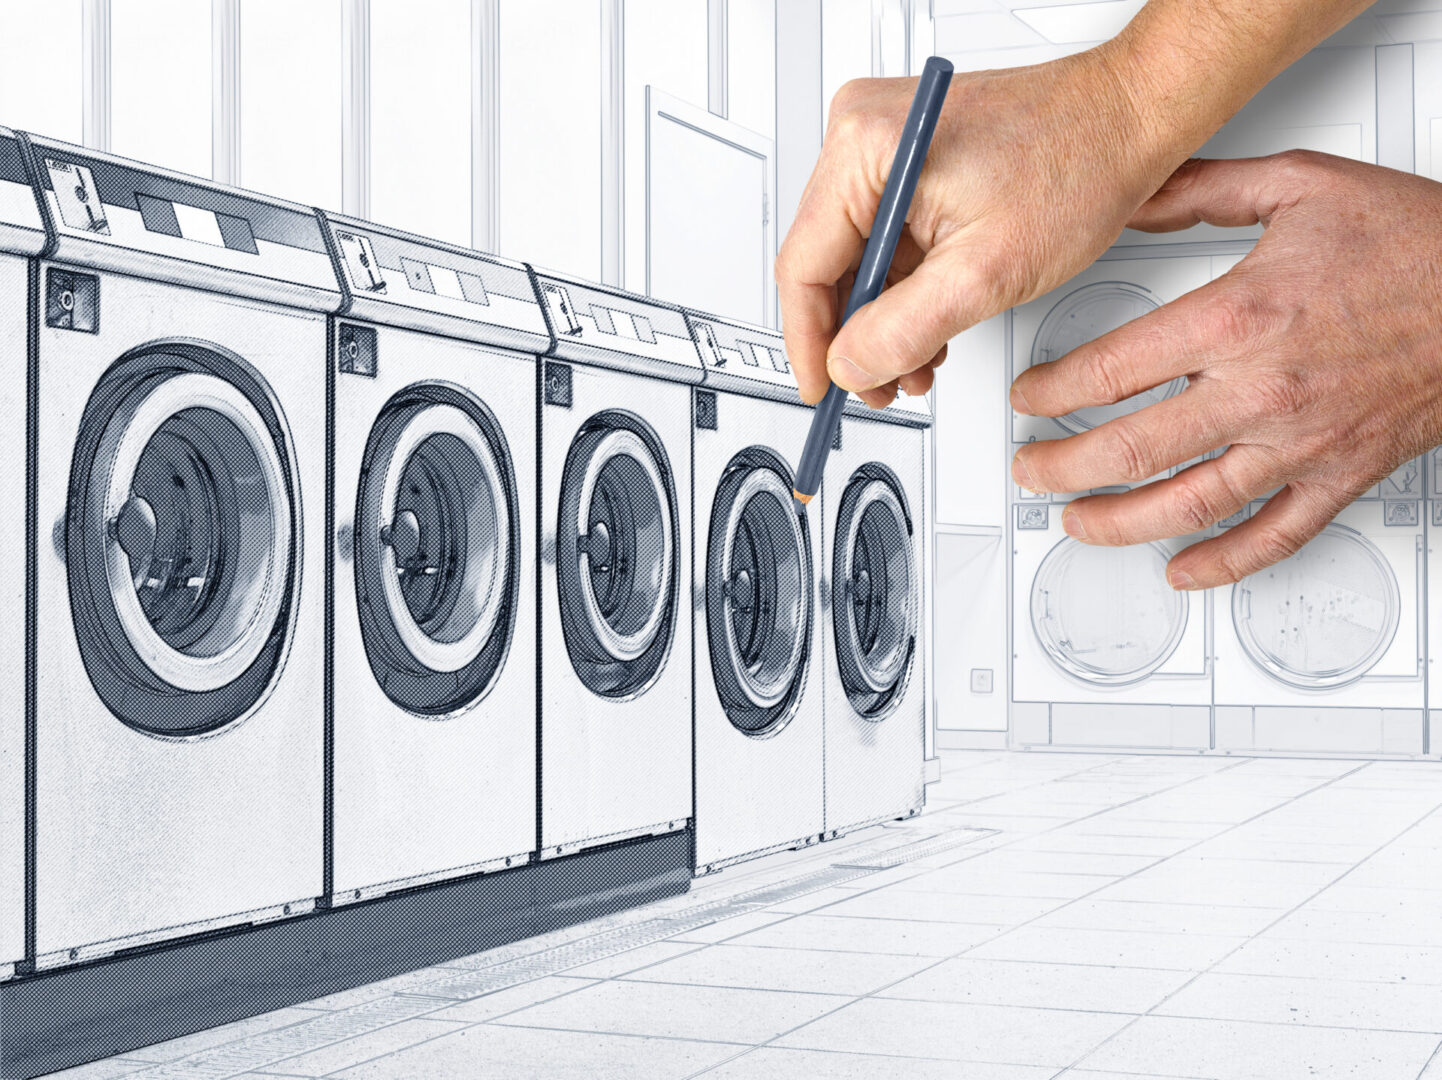 Sketch,From,A,Row,Of,Industrial,Washing,Machines,In,A